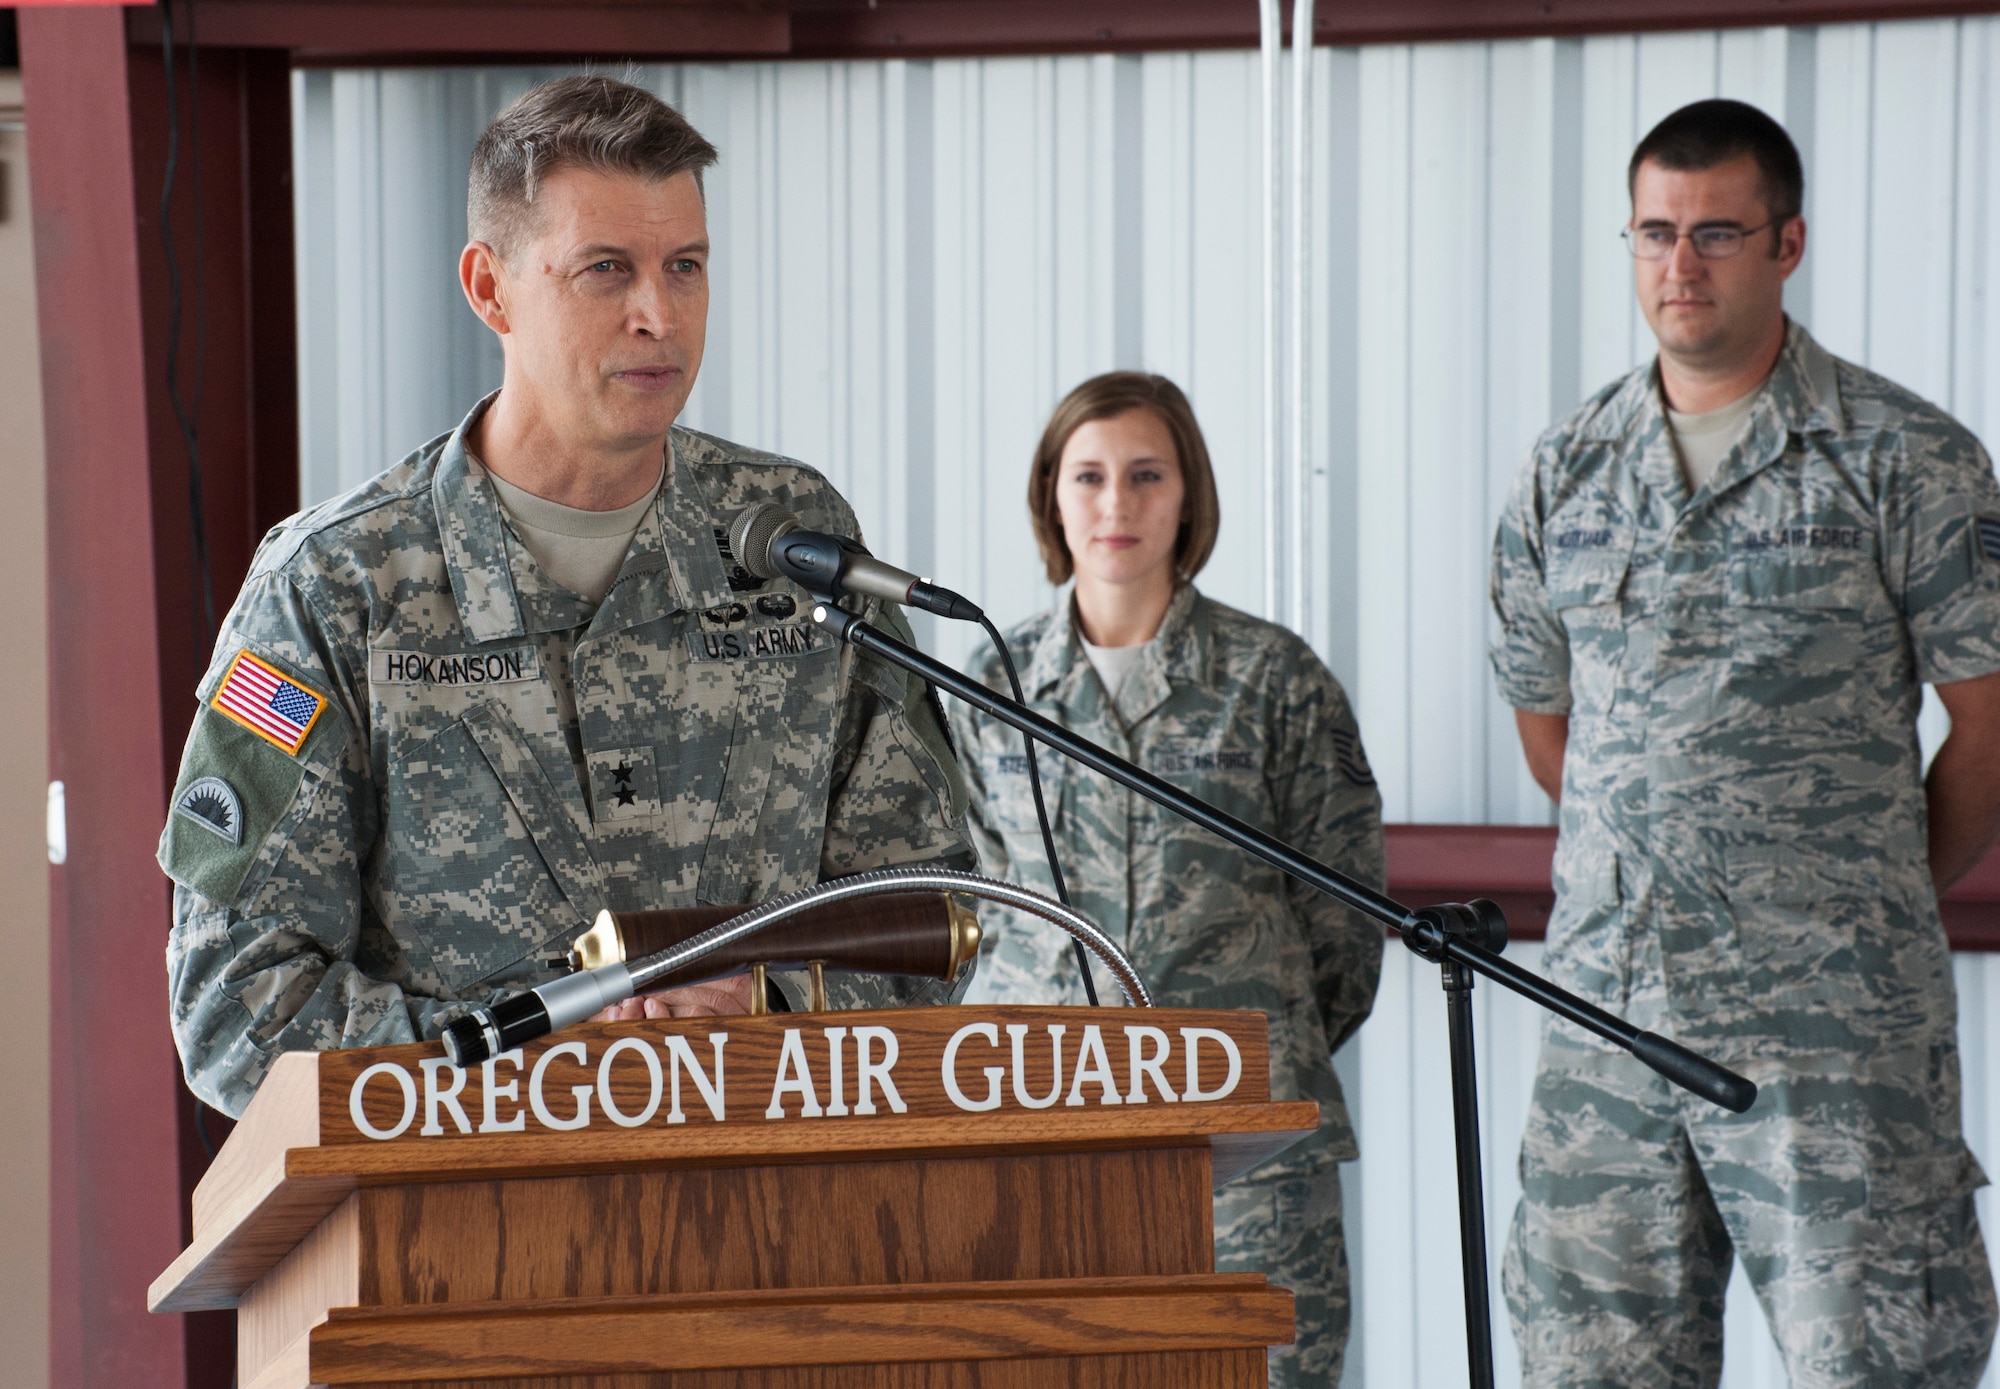 Oregon Army National Guard Maj. Gen. Daniel R. Hokanson, Adjutant General, Oregon, discusses the role of the 142nd Fighter Wing with regard to its Aerospace Control Alert mission during the official ribbon cutting ceremony for the new alert barn at the Portland Air National Guard Base, Ore., July 10. The 142 Fighter Wing is tasked with protecting the skies over the Pacific Northwest, from northern California to the Canadian border, and extending out along the Pacific coastline. (U.S. Air National Guard photo by Tech. Sgt. John Hughel, 142nd Fighter Wing Public Affairs/Released)